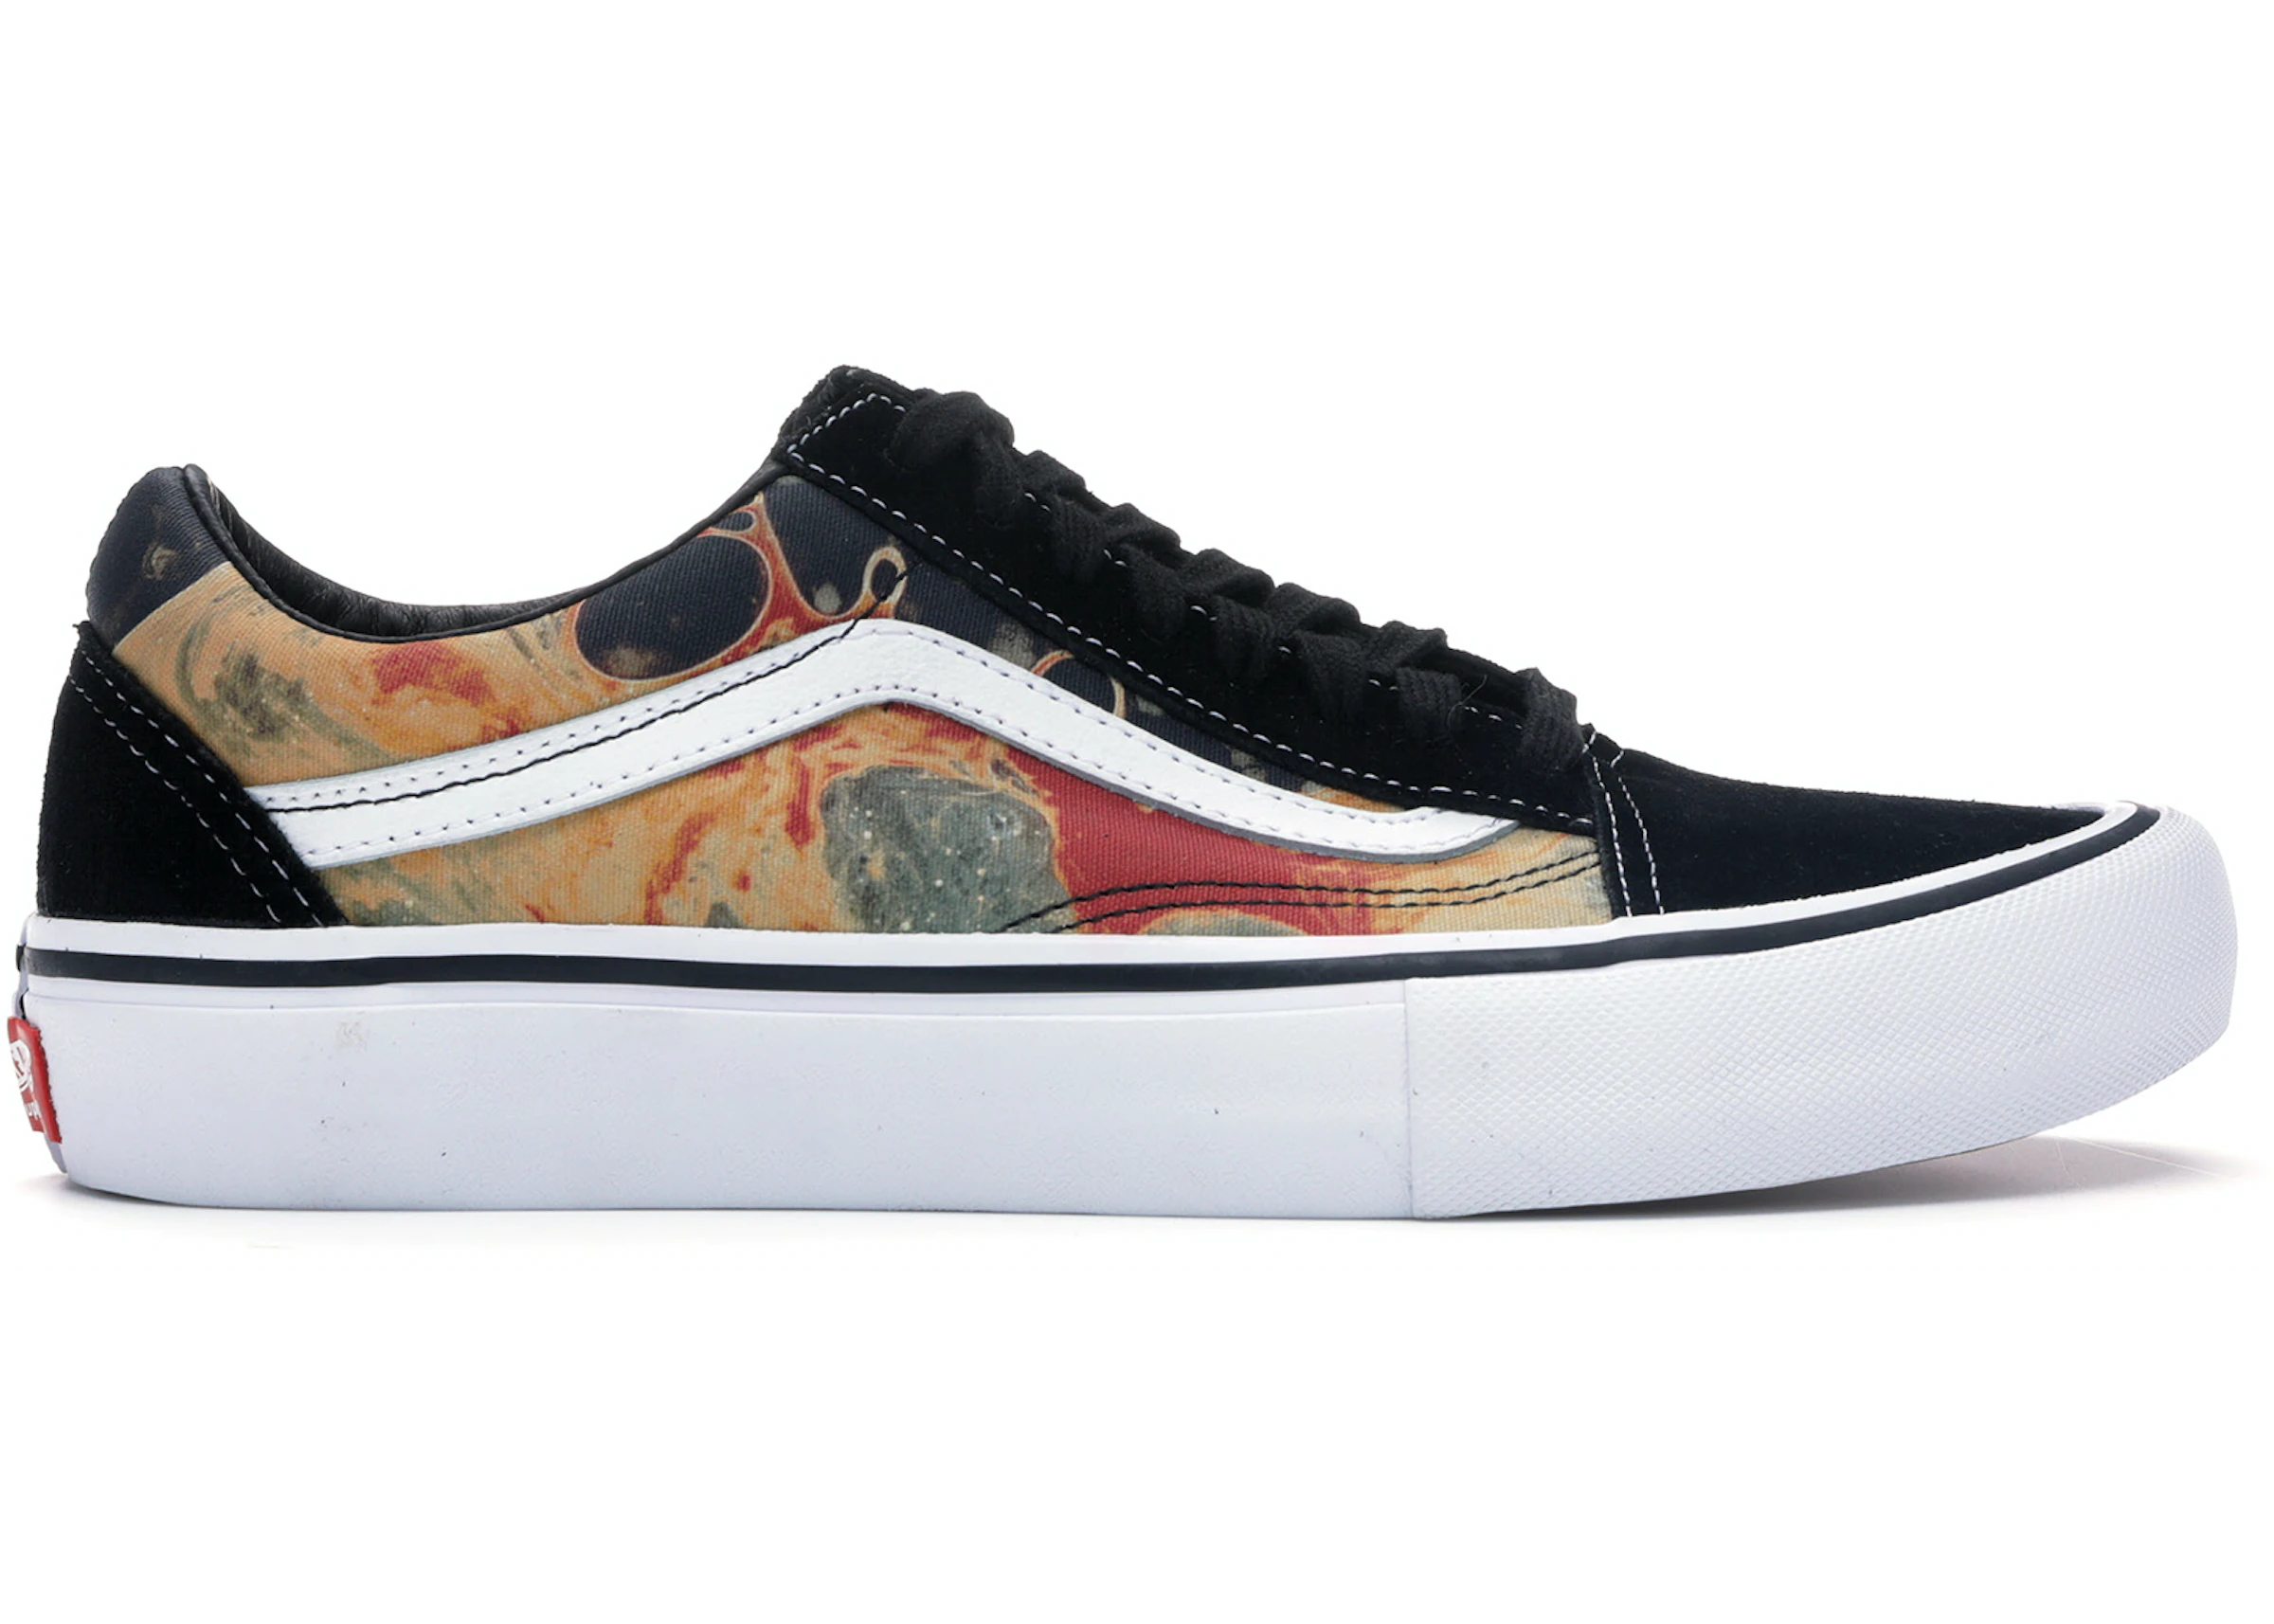 Give birth rainfall Excavation Vans Old Skool Supreme x Andres Serrano Blood and Semen II - VN000ZD4RZW -  US